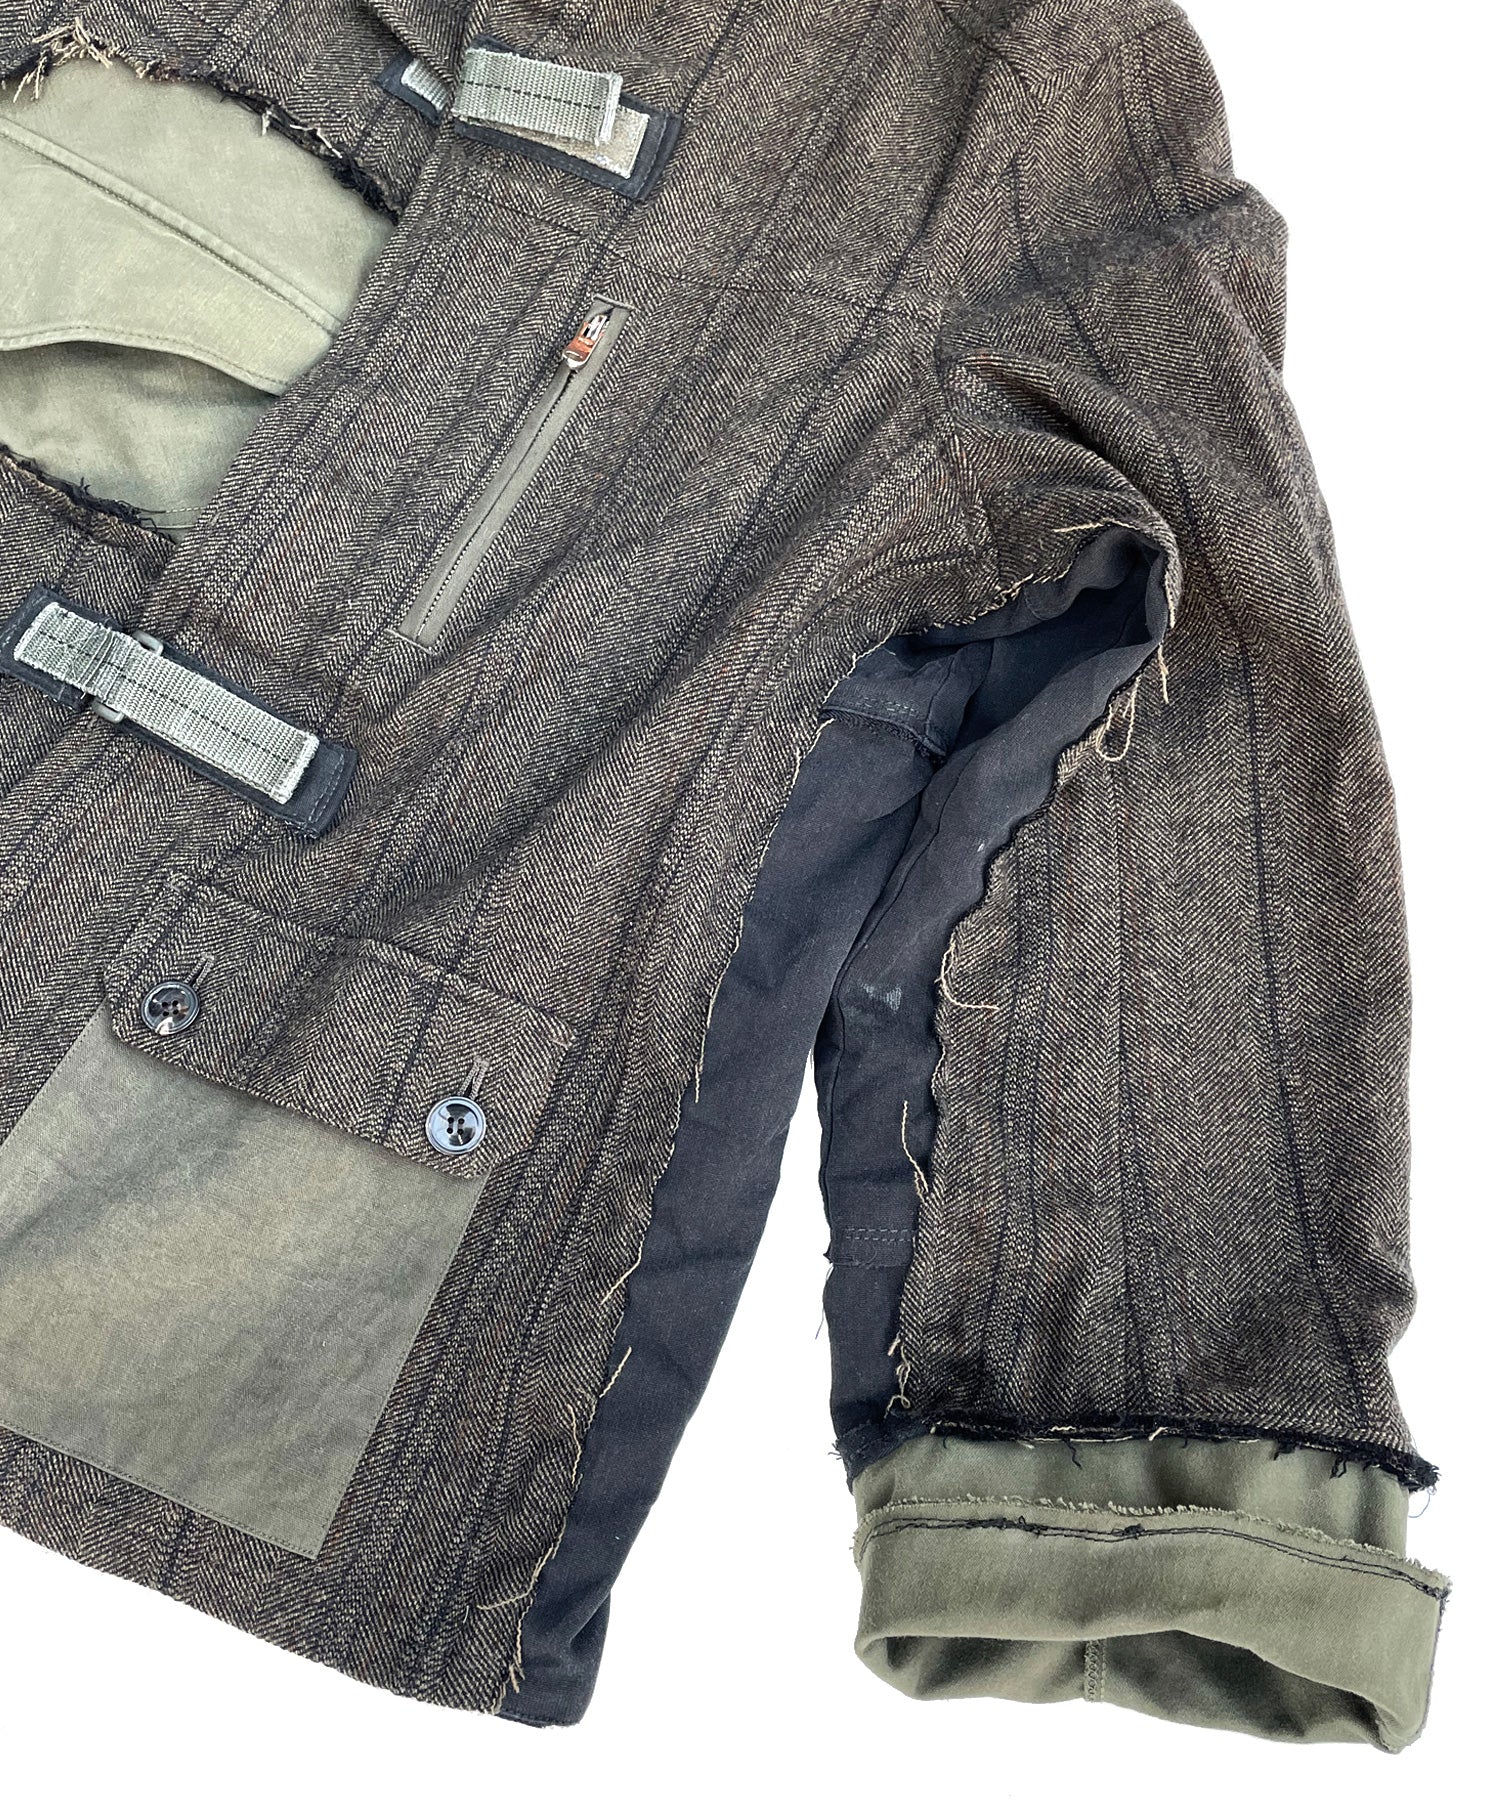 Load image into Gallery viewer, [One-of-a-kind item] Remake oversized jacket / KHAKI / L size equivalent